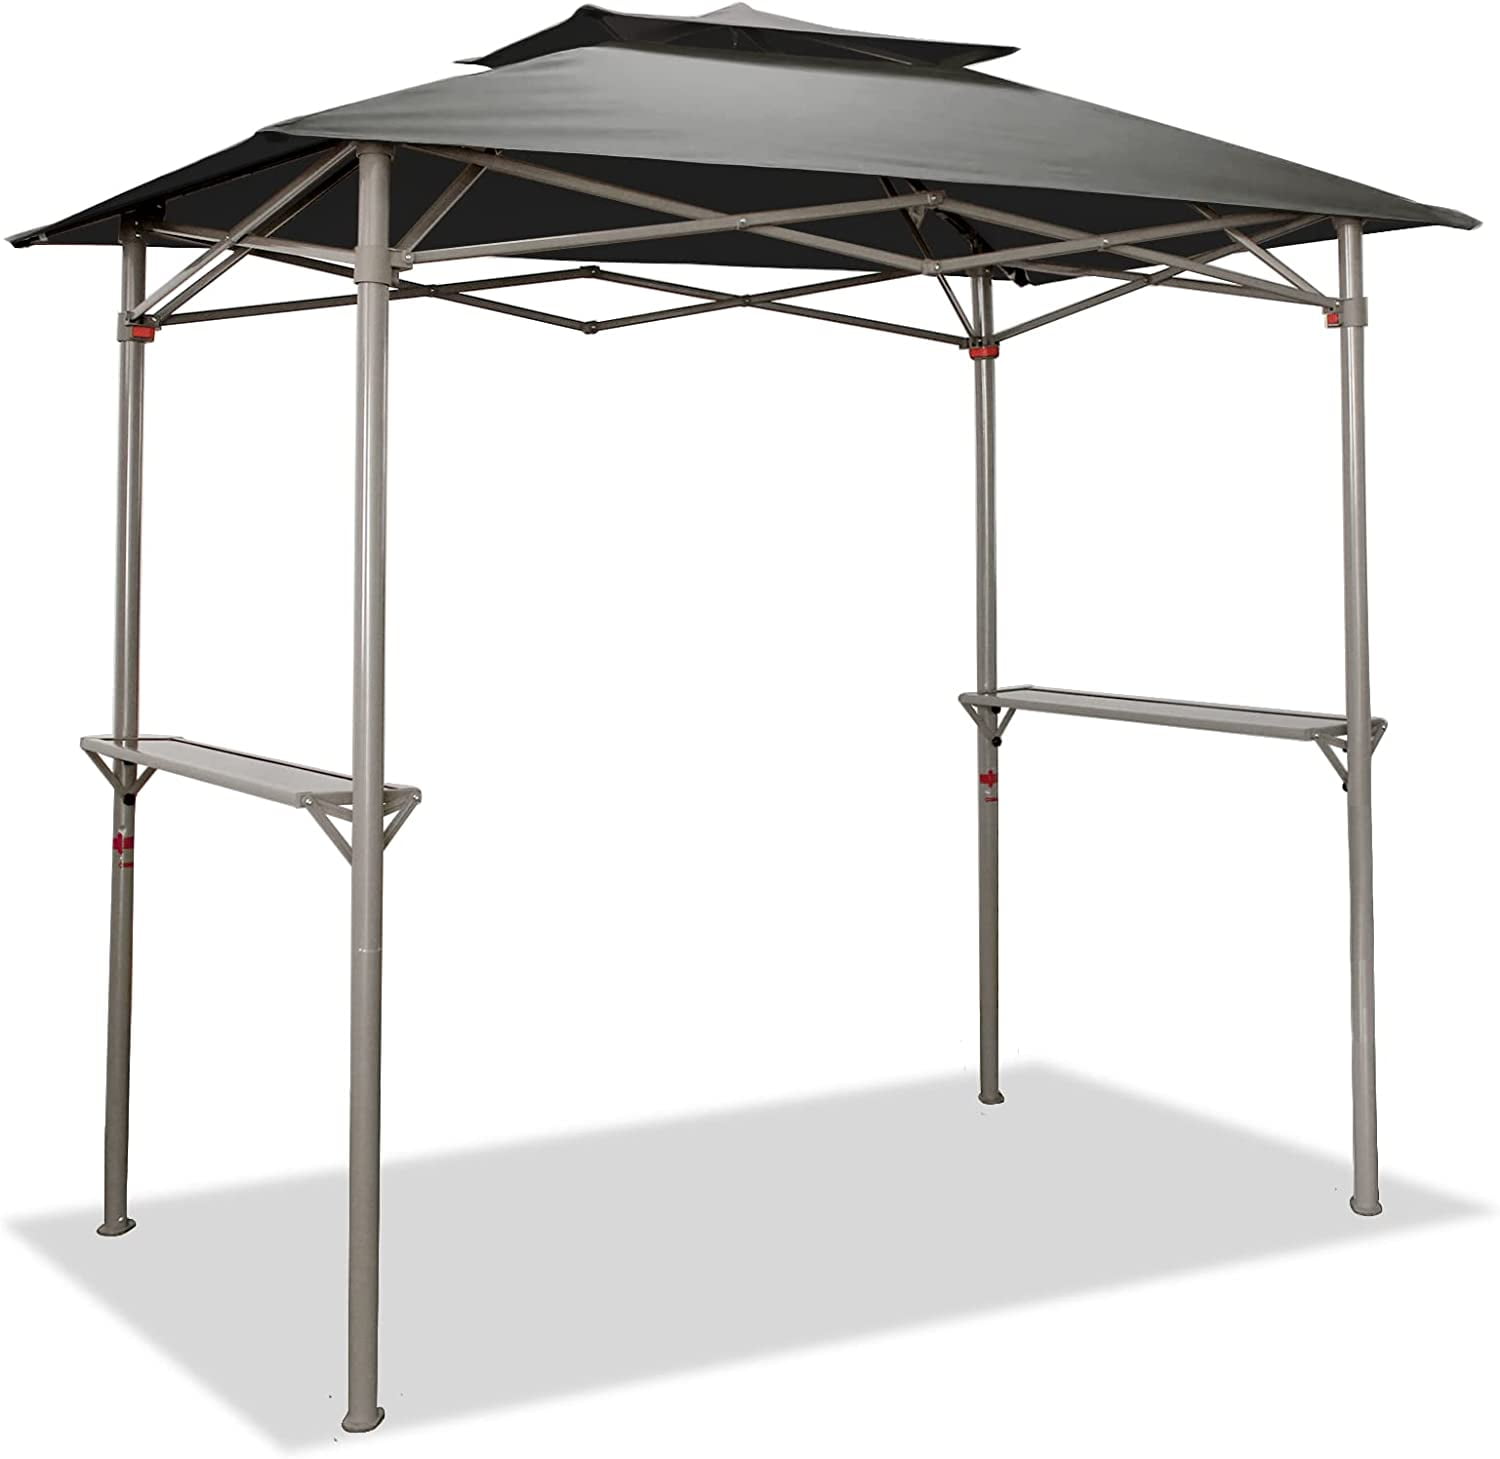 CROWN 8 x 5 Grill Gazebo Outdoor BBQ Gazebo Canopy 8x5 Double Tiered Canopy Tent,UV Resistant and Waterproof Fabric,Easy Setup (Grey) - Walmart.com